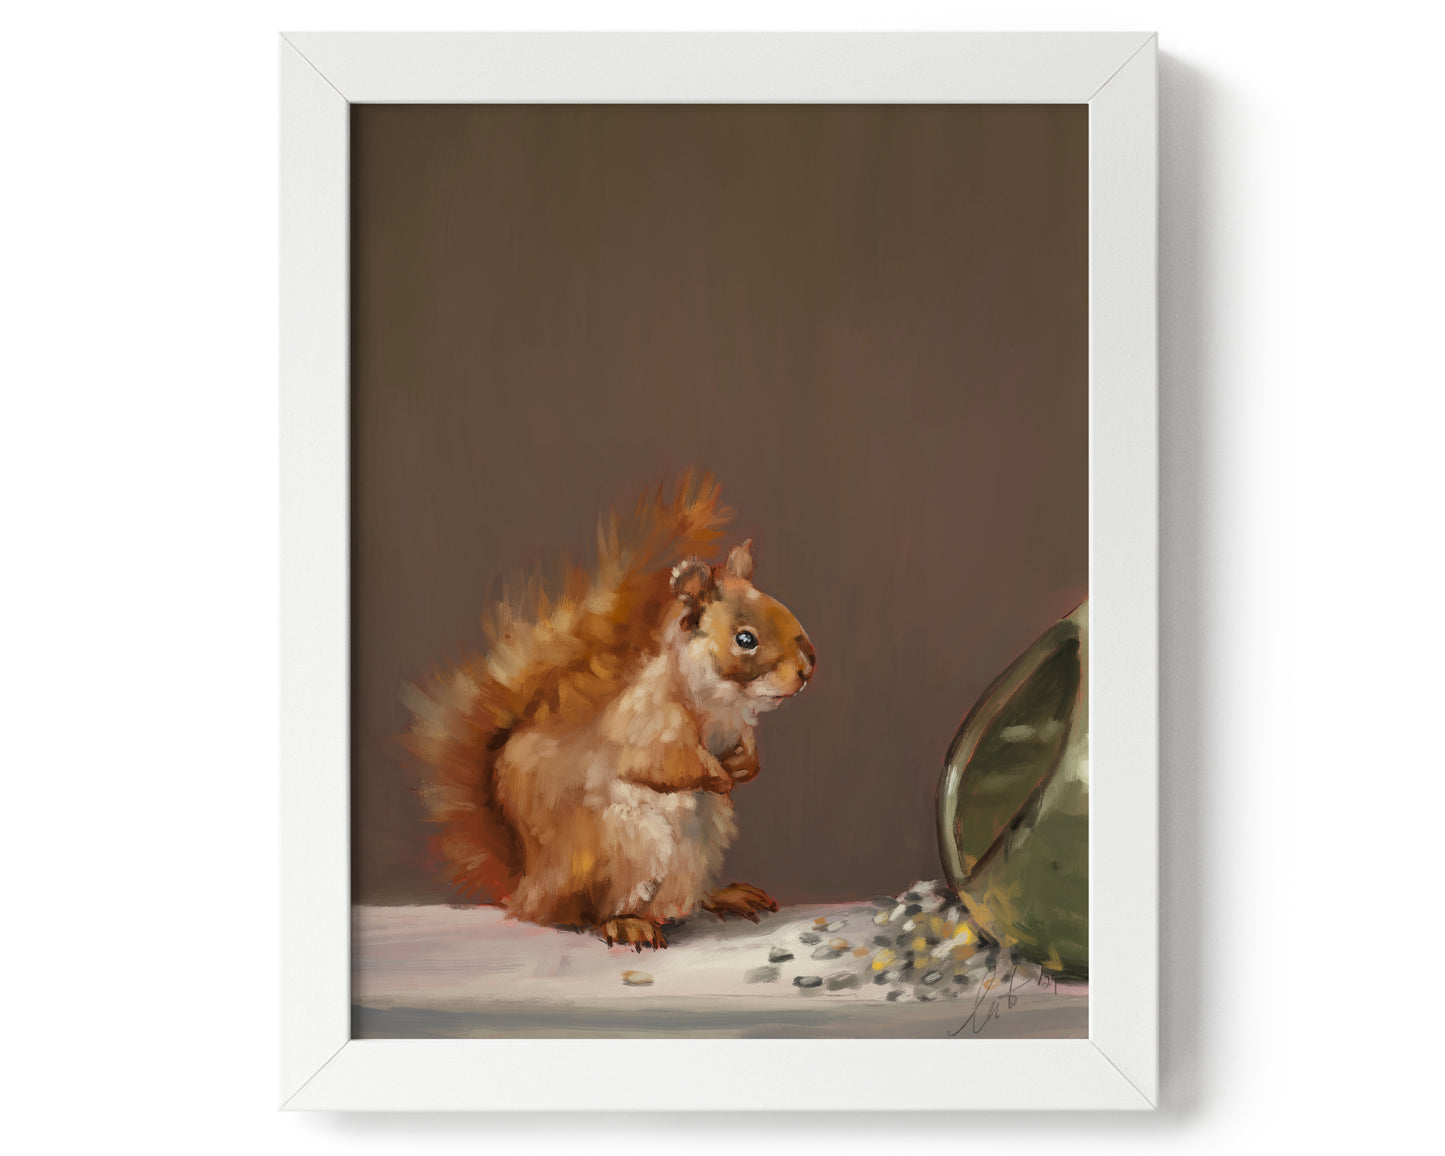 "Titi the Squirrel" by Catherine Hébert - Red Squirrel Oil Painting Giclée Art Print - 8"x10" size